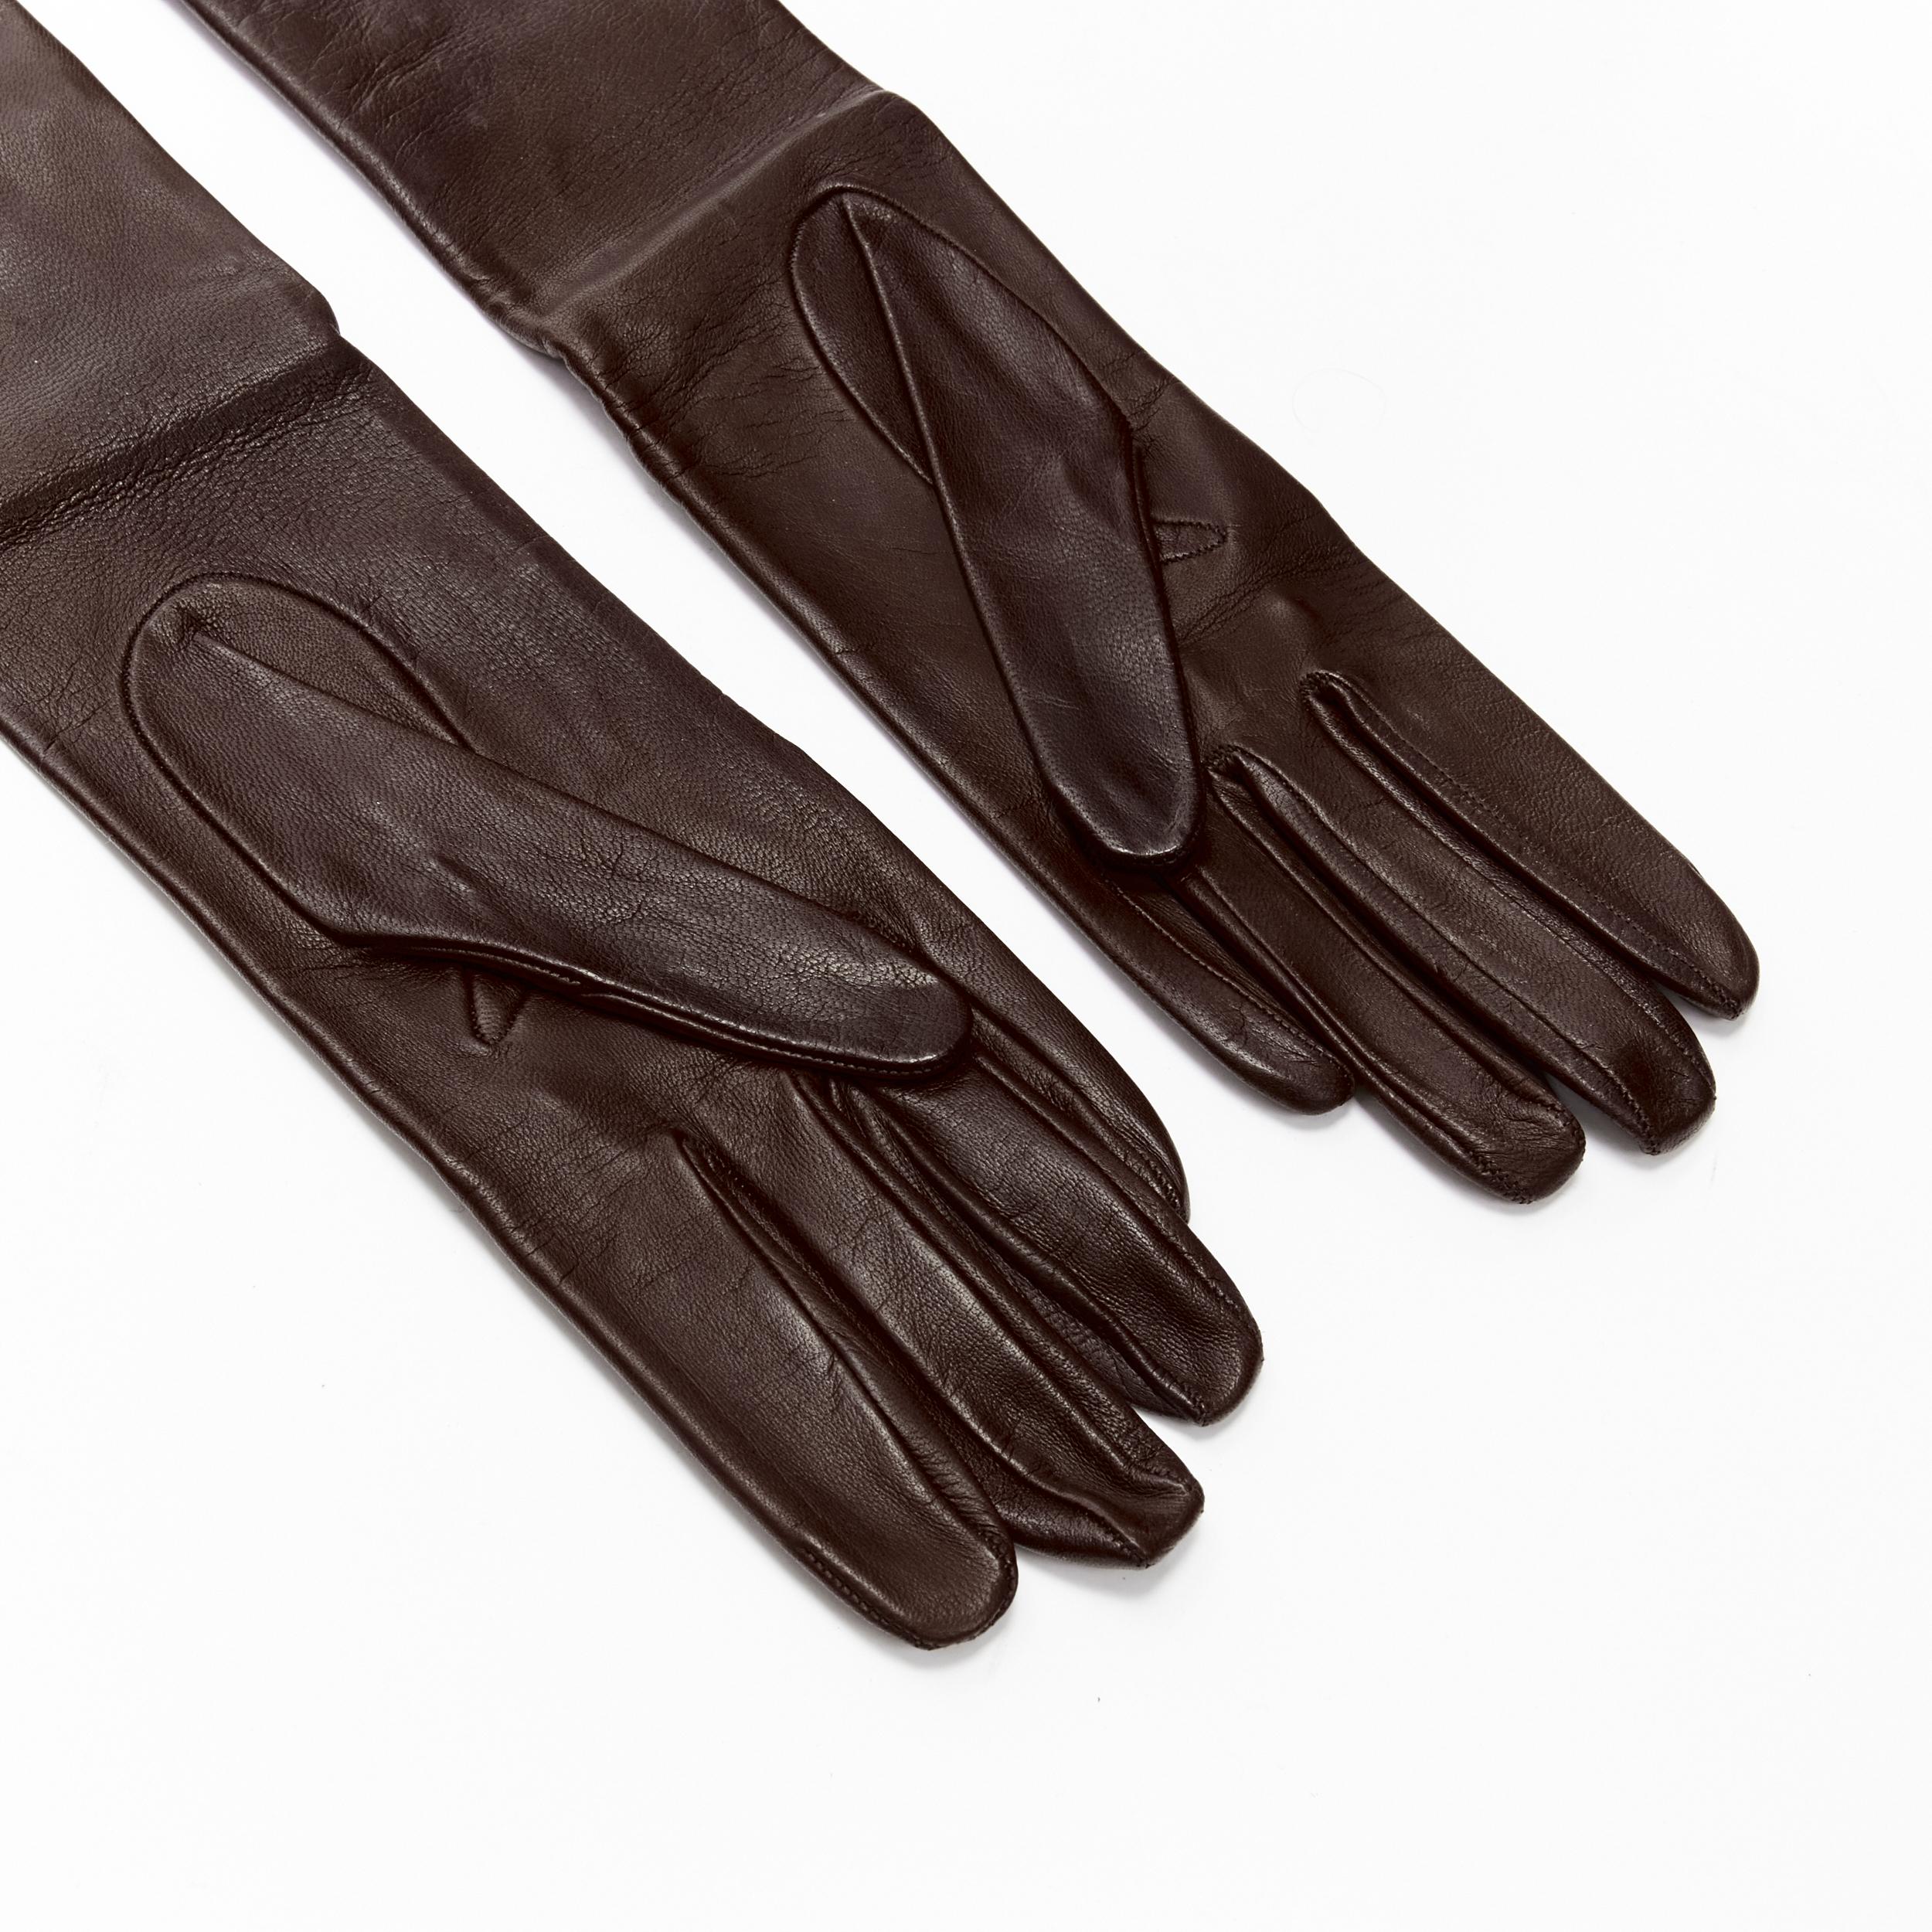 GUCCI Vintage dark brown leather gold stud trim long gloves Sz.7
Brand: Gucci
Designer: Tom Ford
Material: Calfskin Leather
Color: Brown
Pattern: Solid
Made in: Italy

CONDITION:
Condition: Very good, this item was pre-owned and is in very good